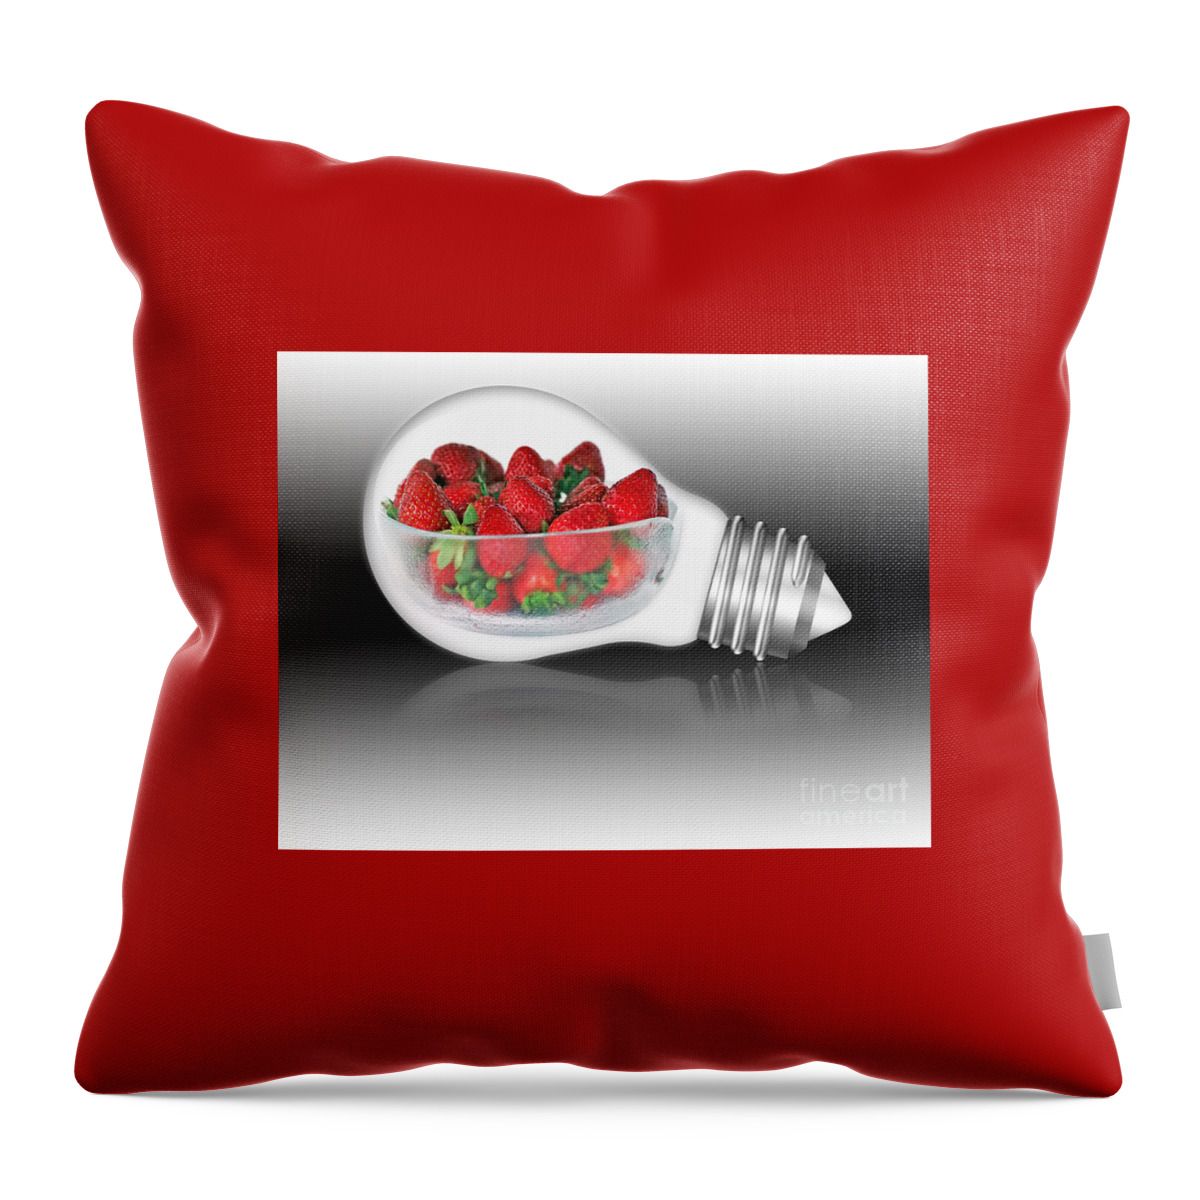 Photography Throw Pillow featuring the photograph Global Strawberries by Kaye Menner